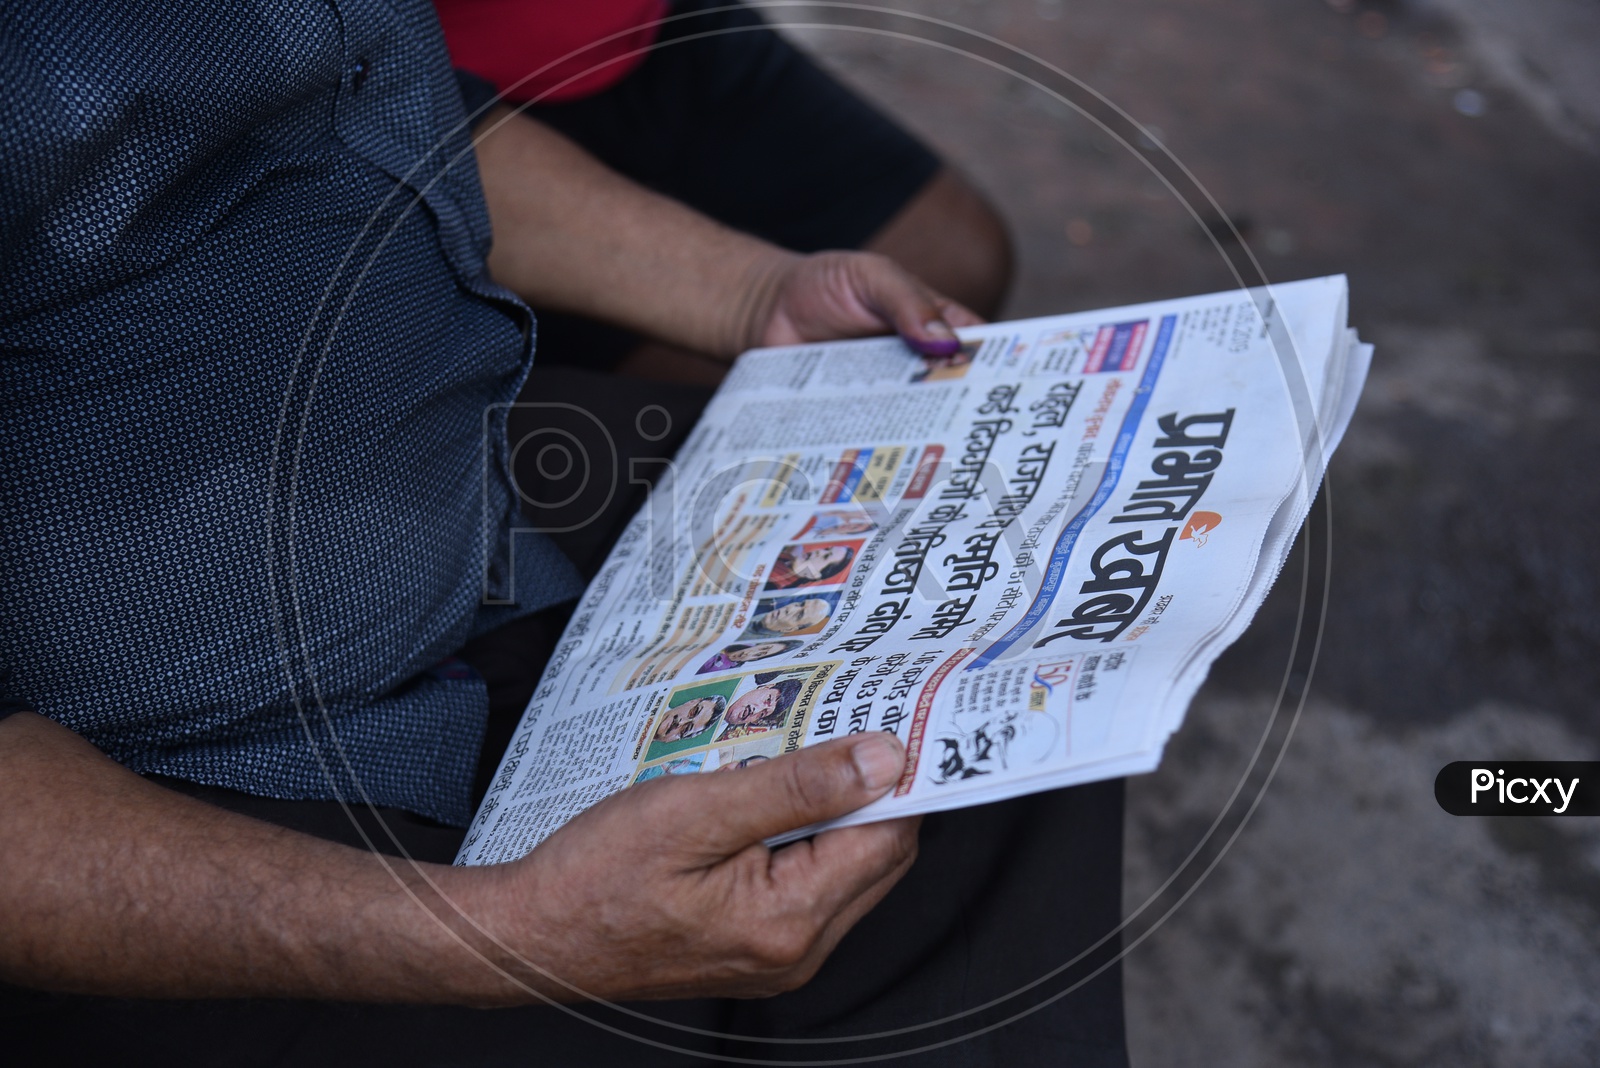 A Man Reading The Prabath Khabar News Paper In West Bengal